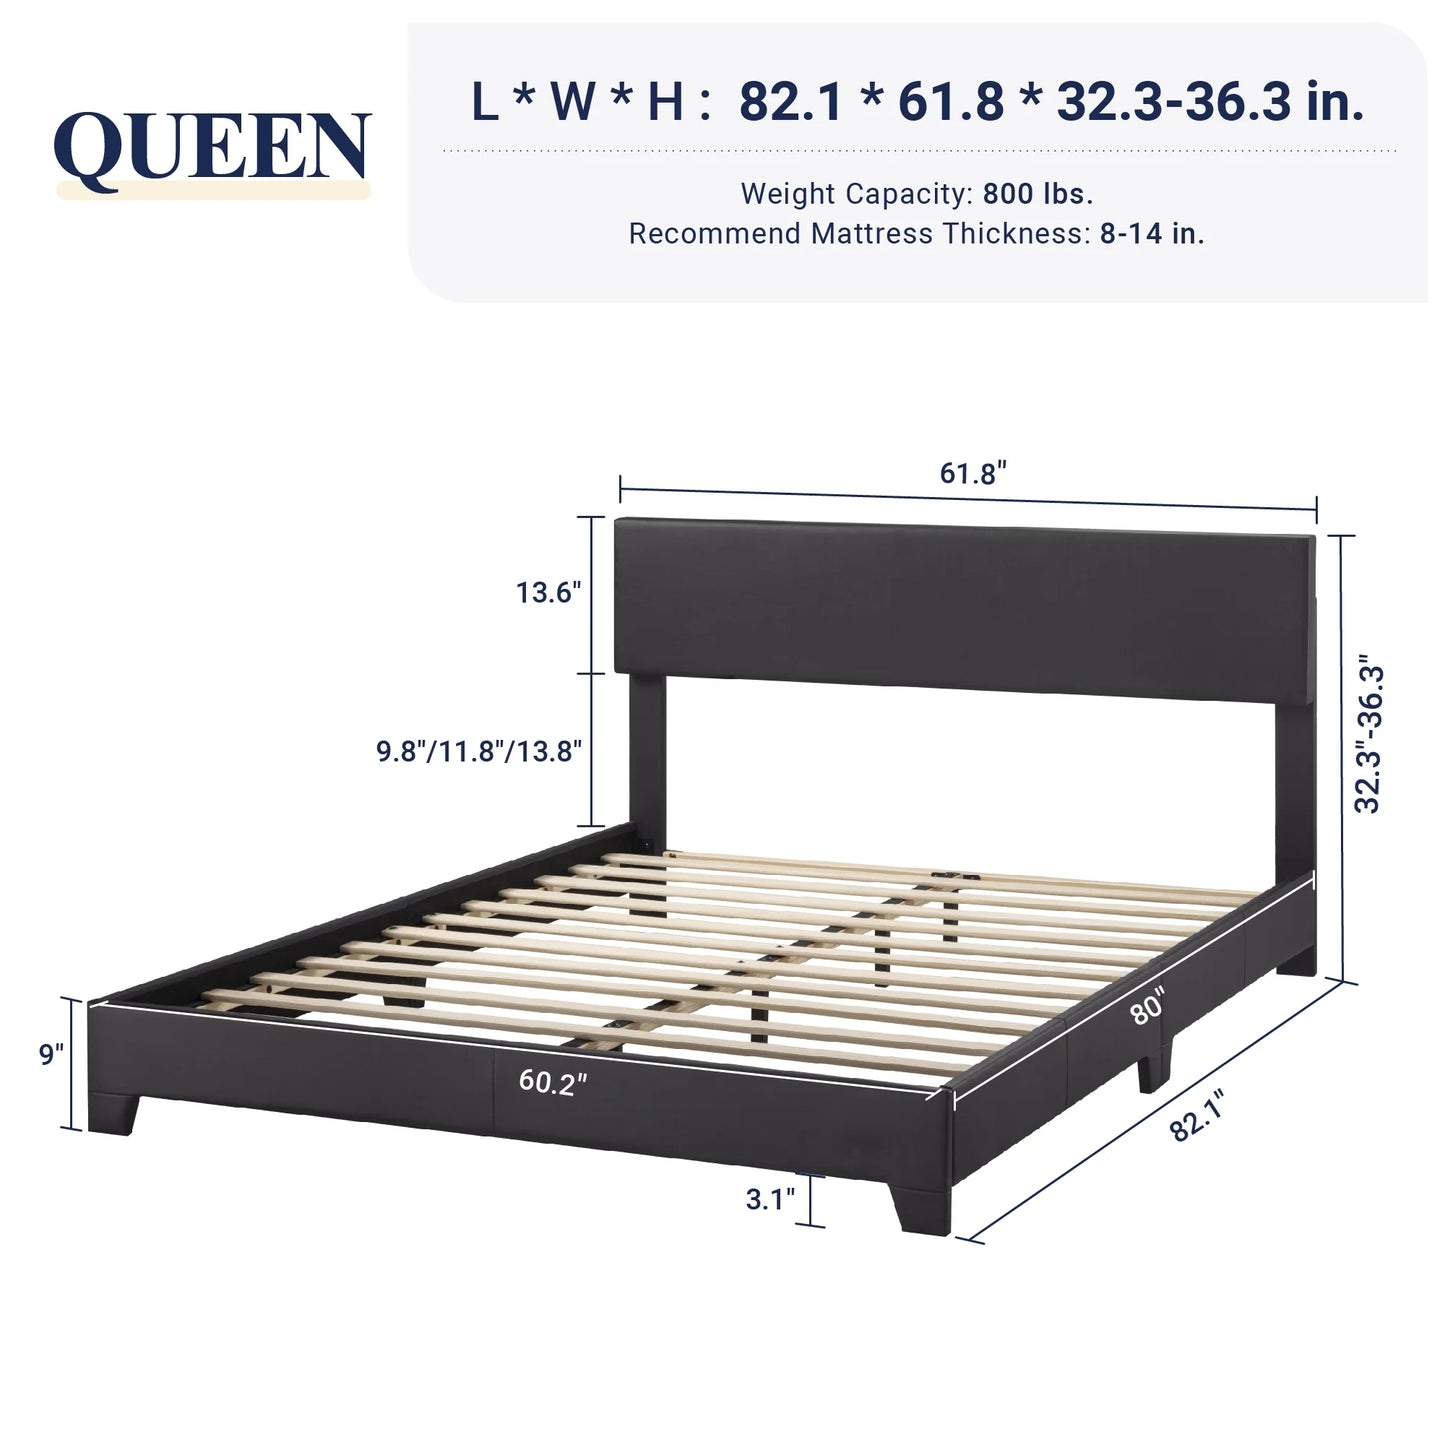 Allewie Queen Size Platform Bed Fame with Upholstered Adjustable Leather Headboard and Wood Slat Support, Black